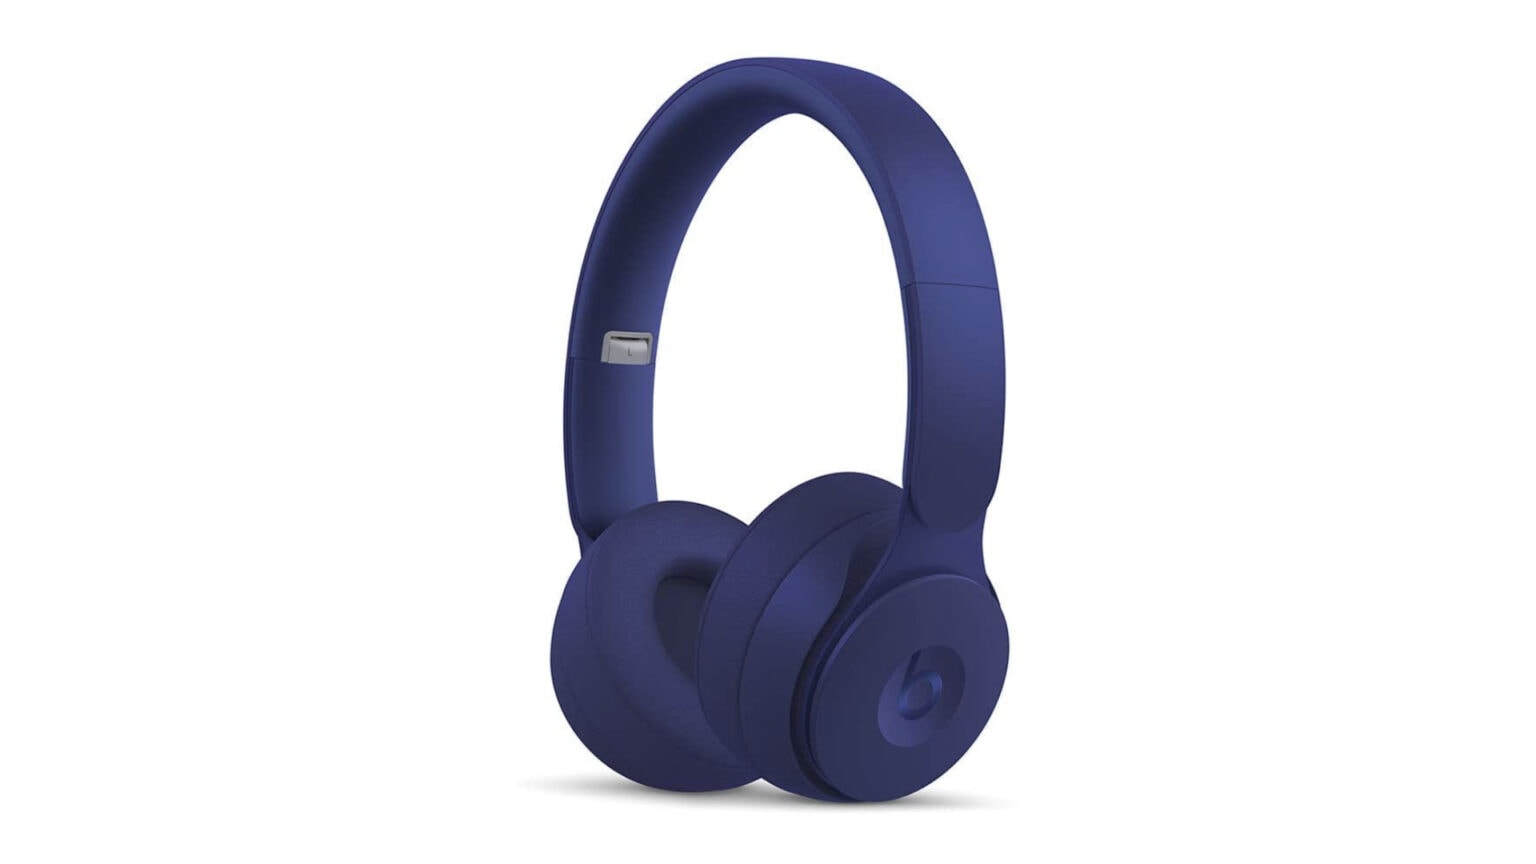 Get Beats Solo Pro at their lowest price yet